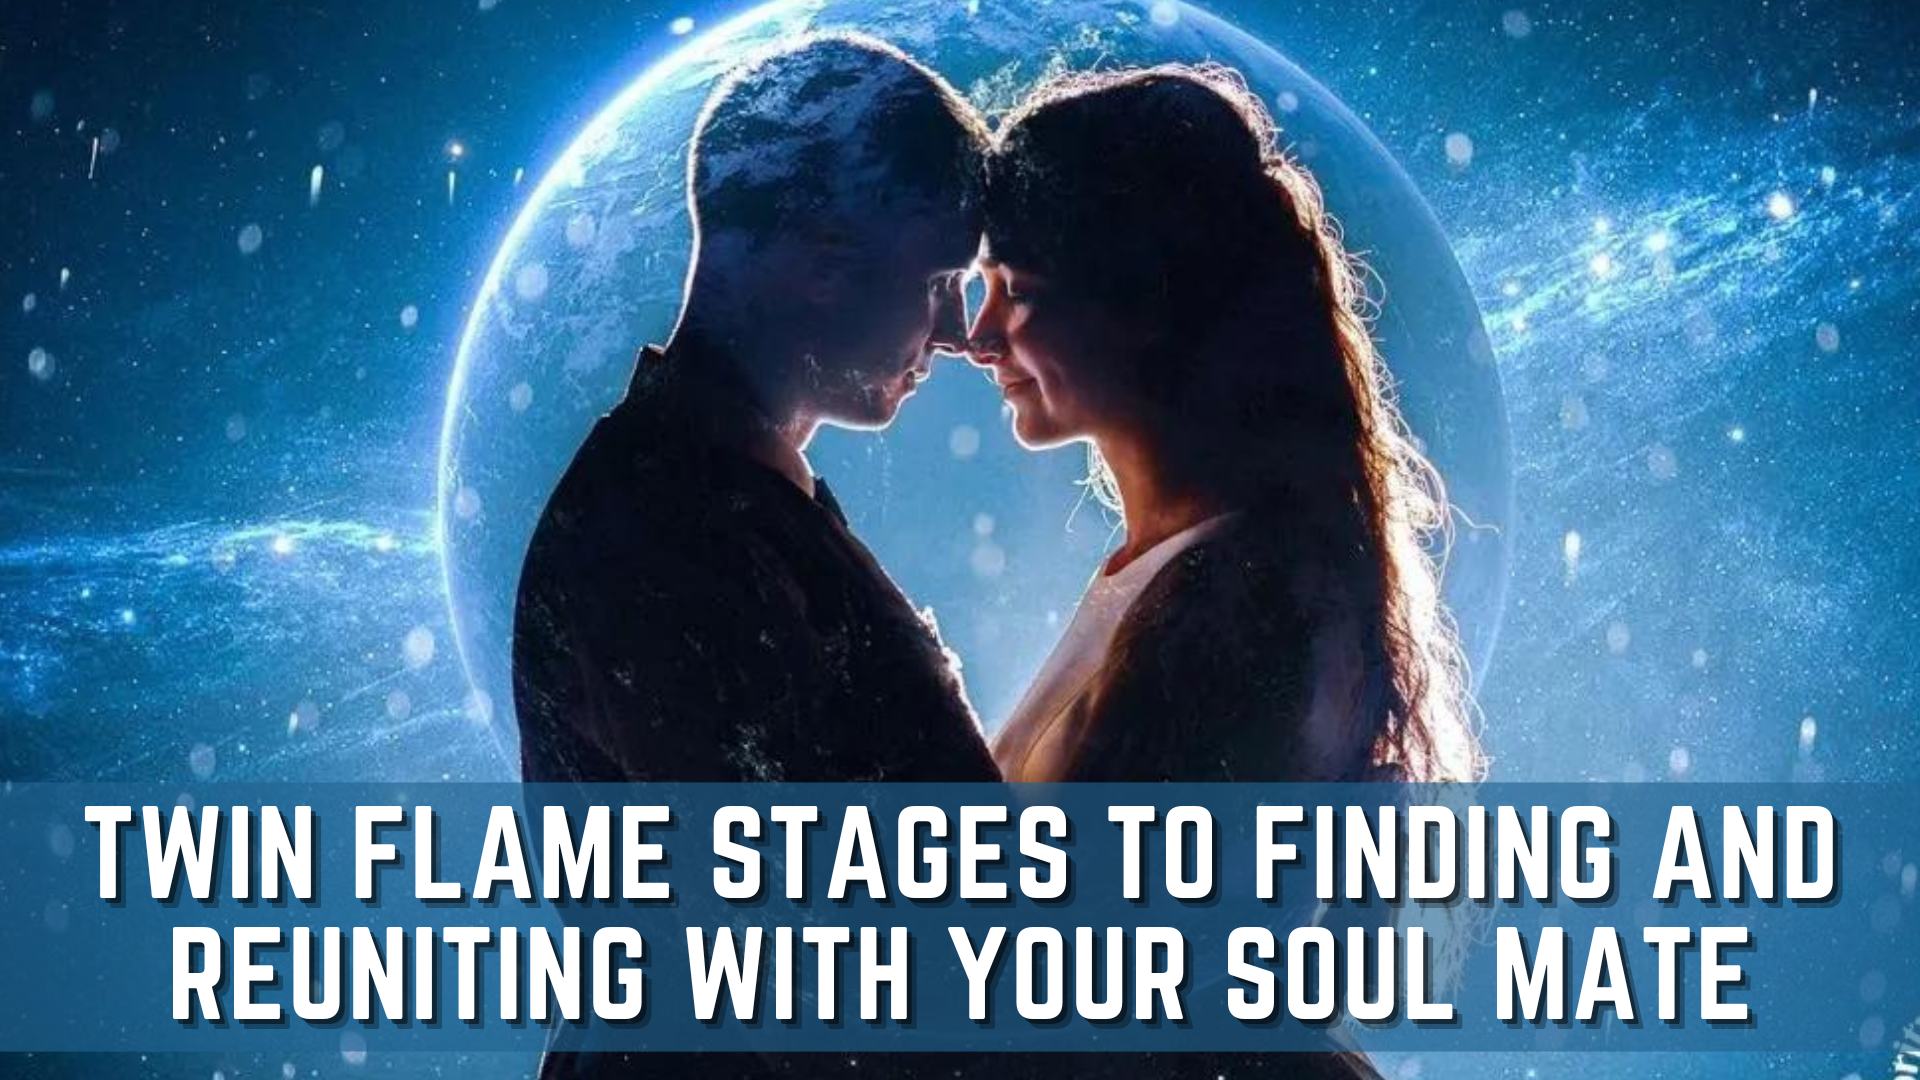 Twin Flame Stages - How To Find And Reunite With Your Soul Mate